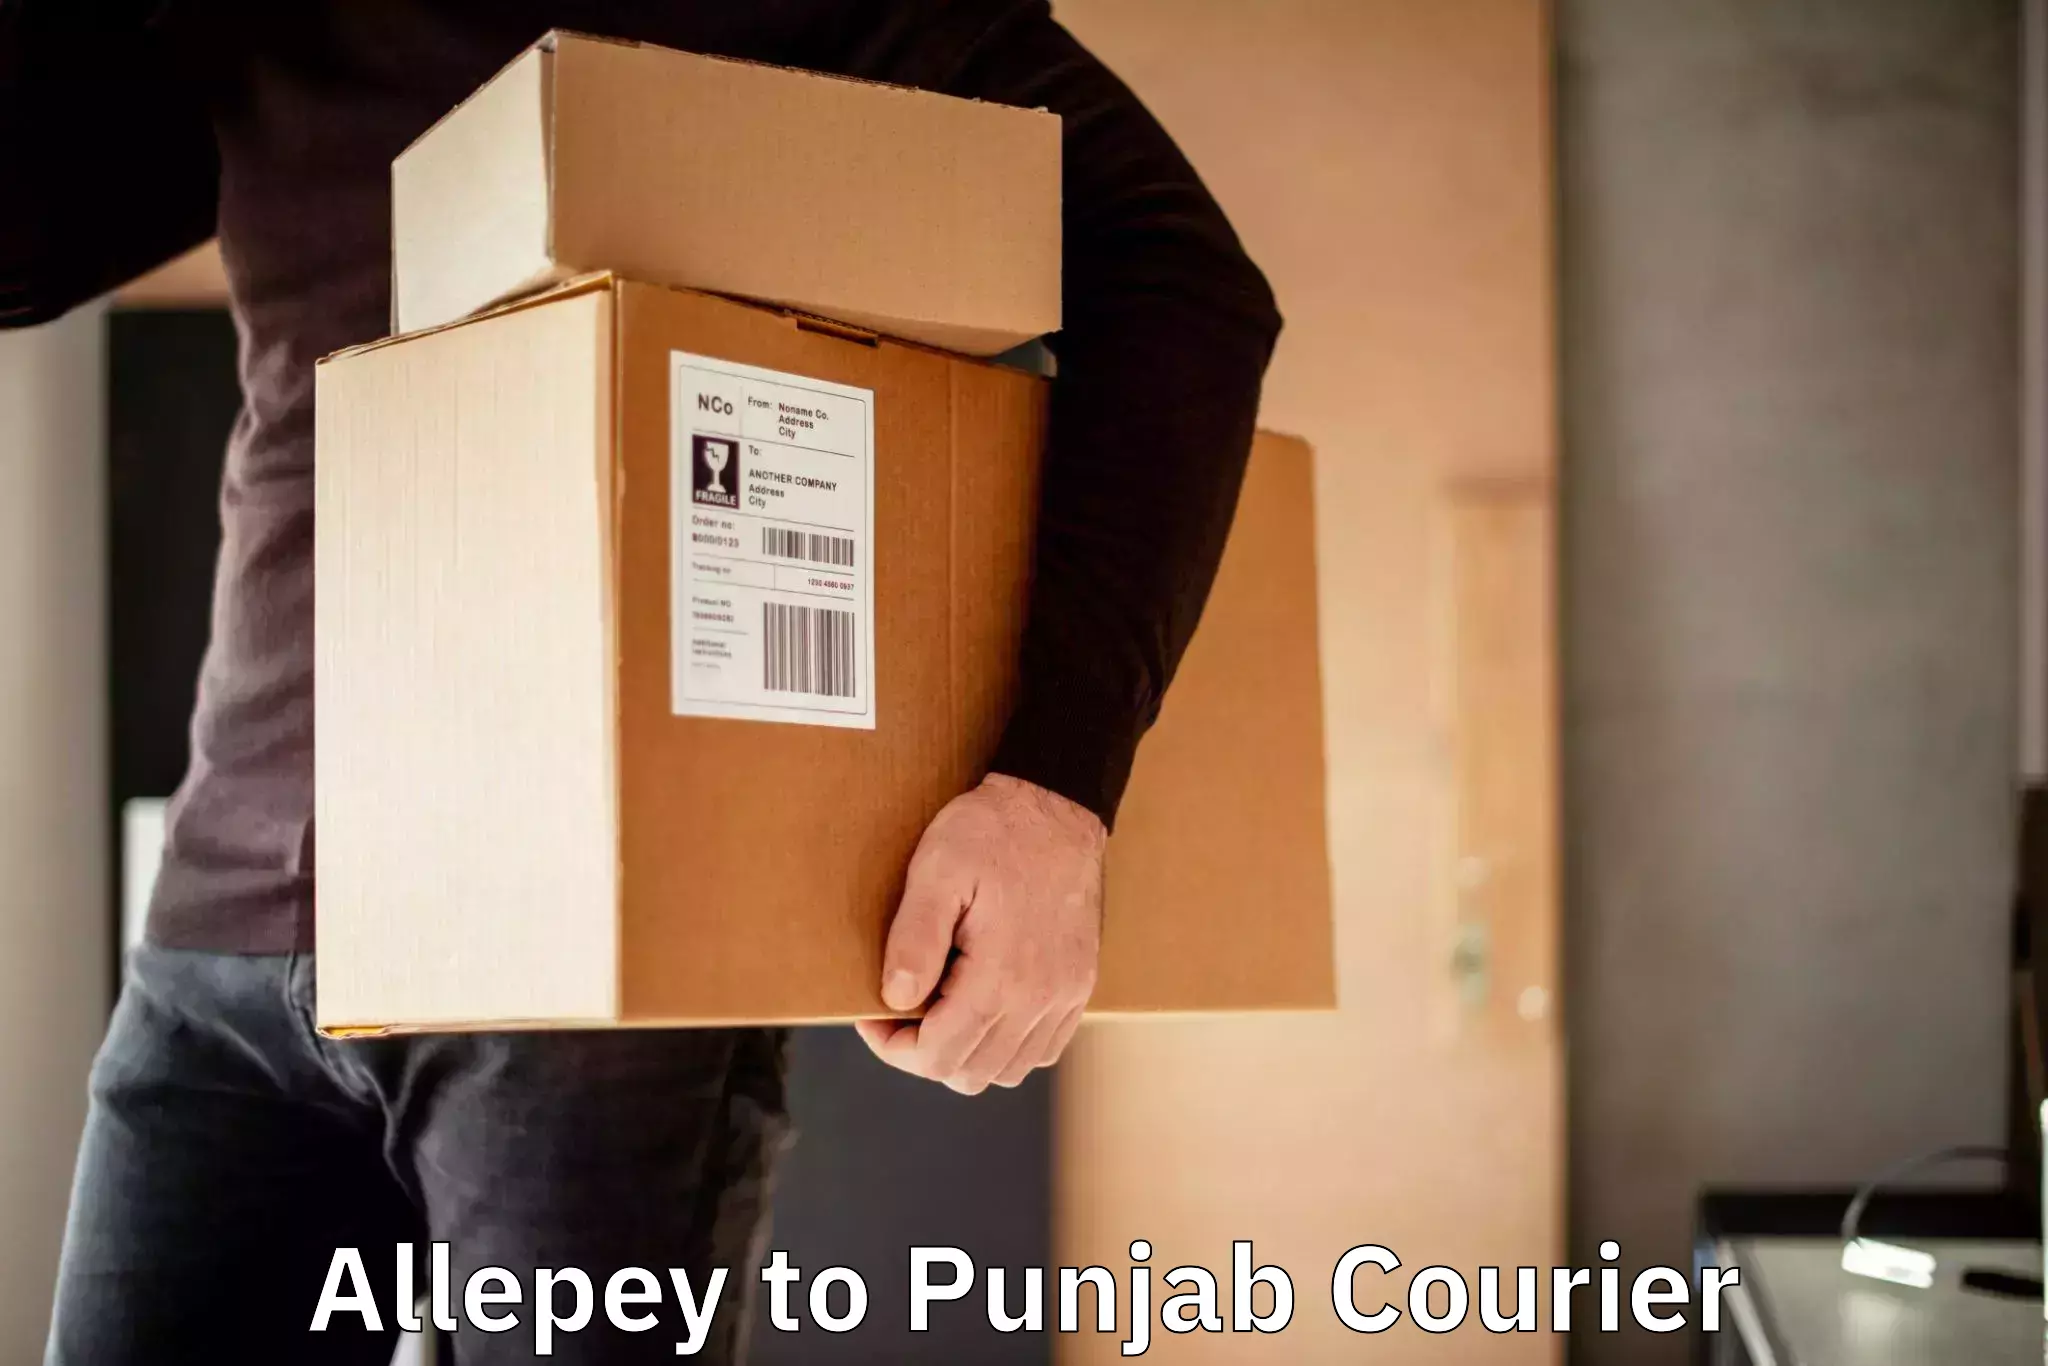 Professional courier handling Allepey to Fazilka